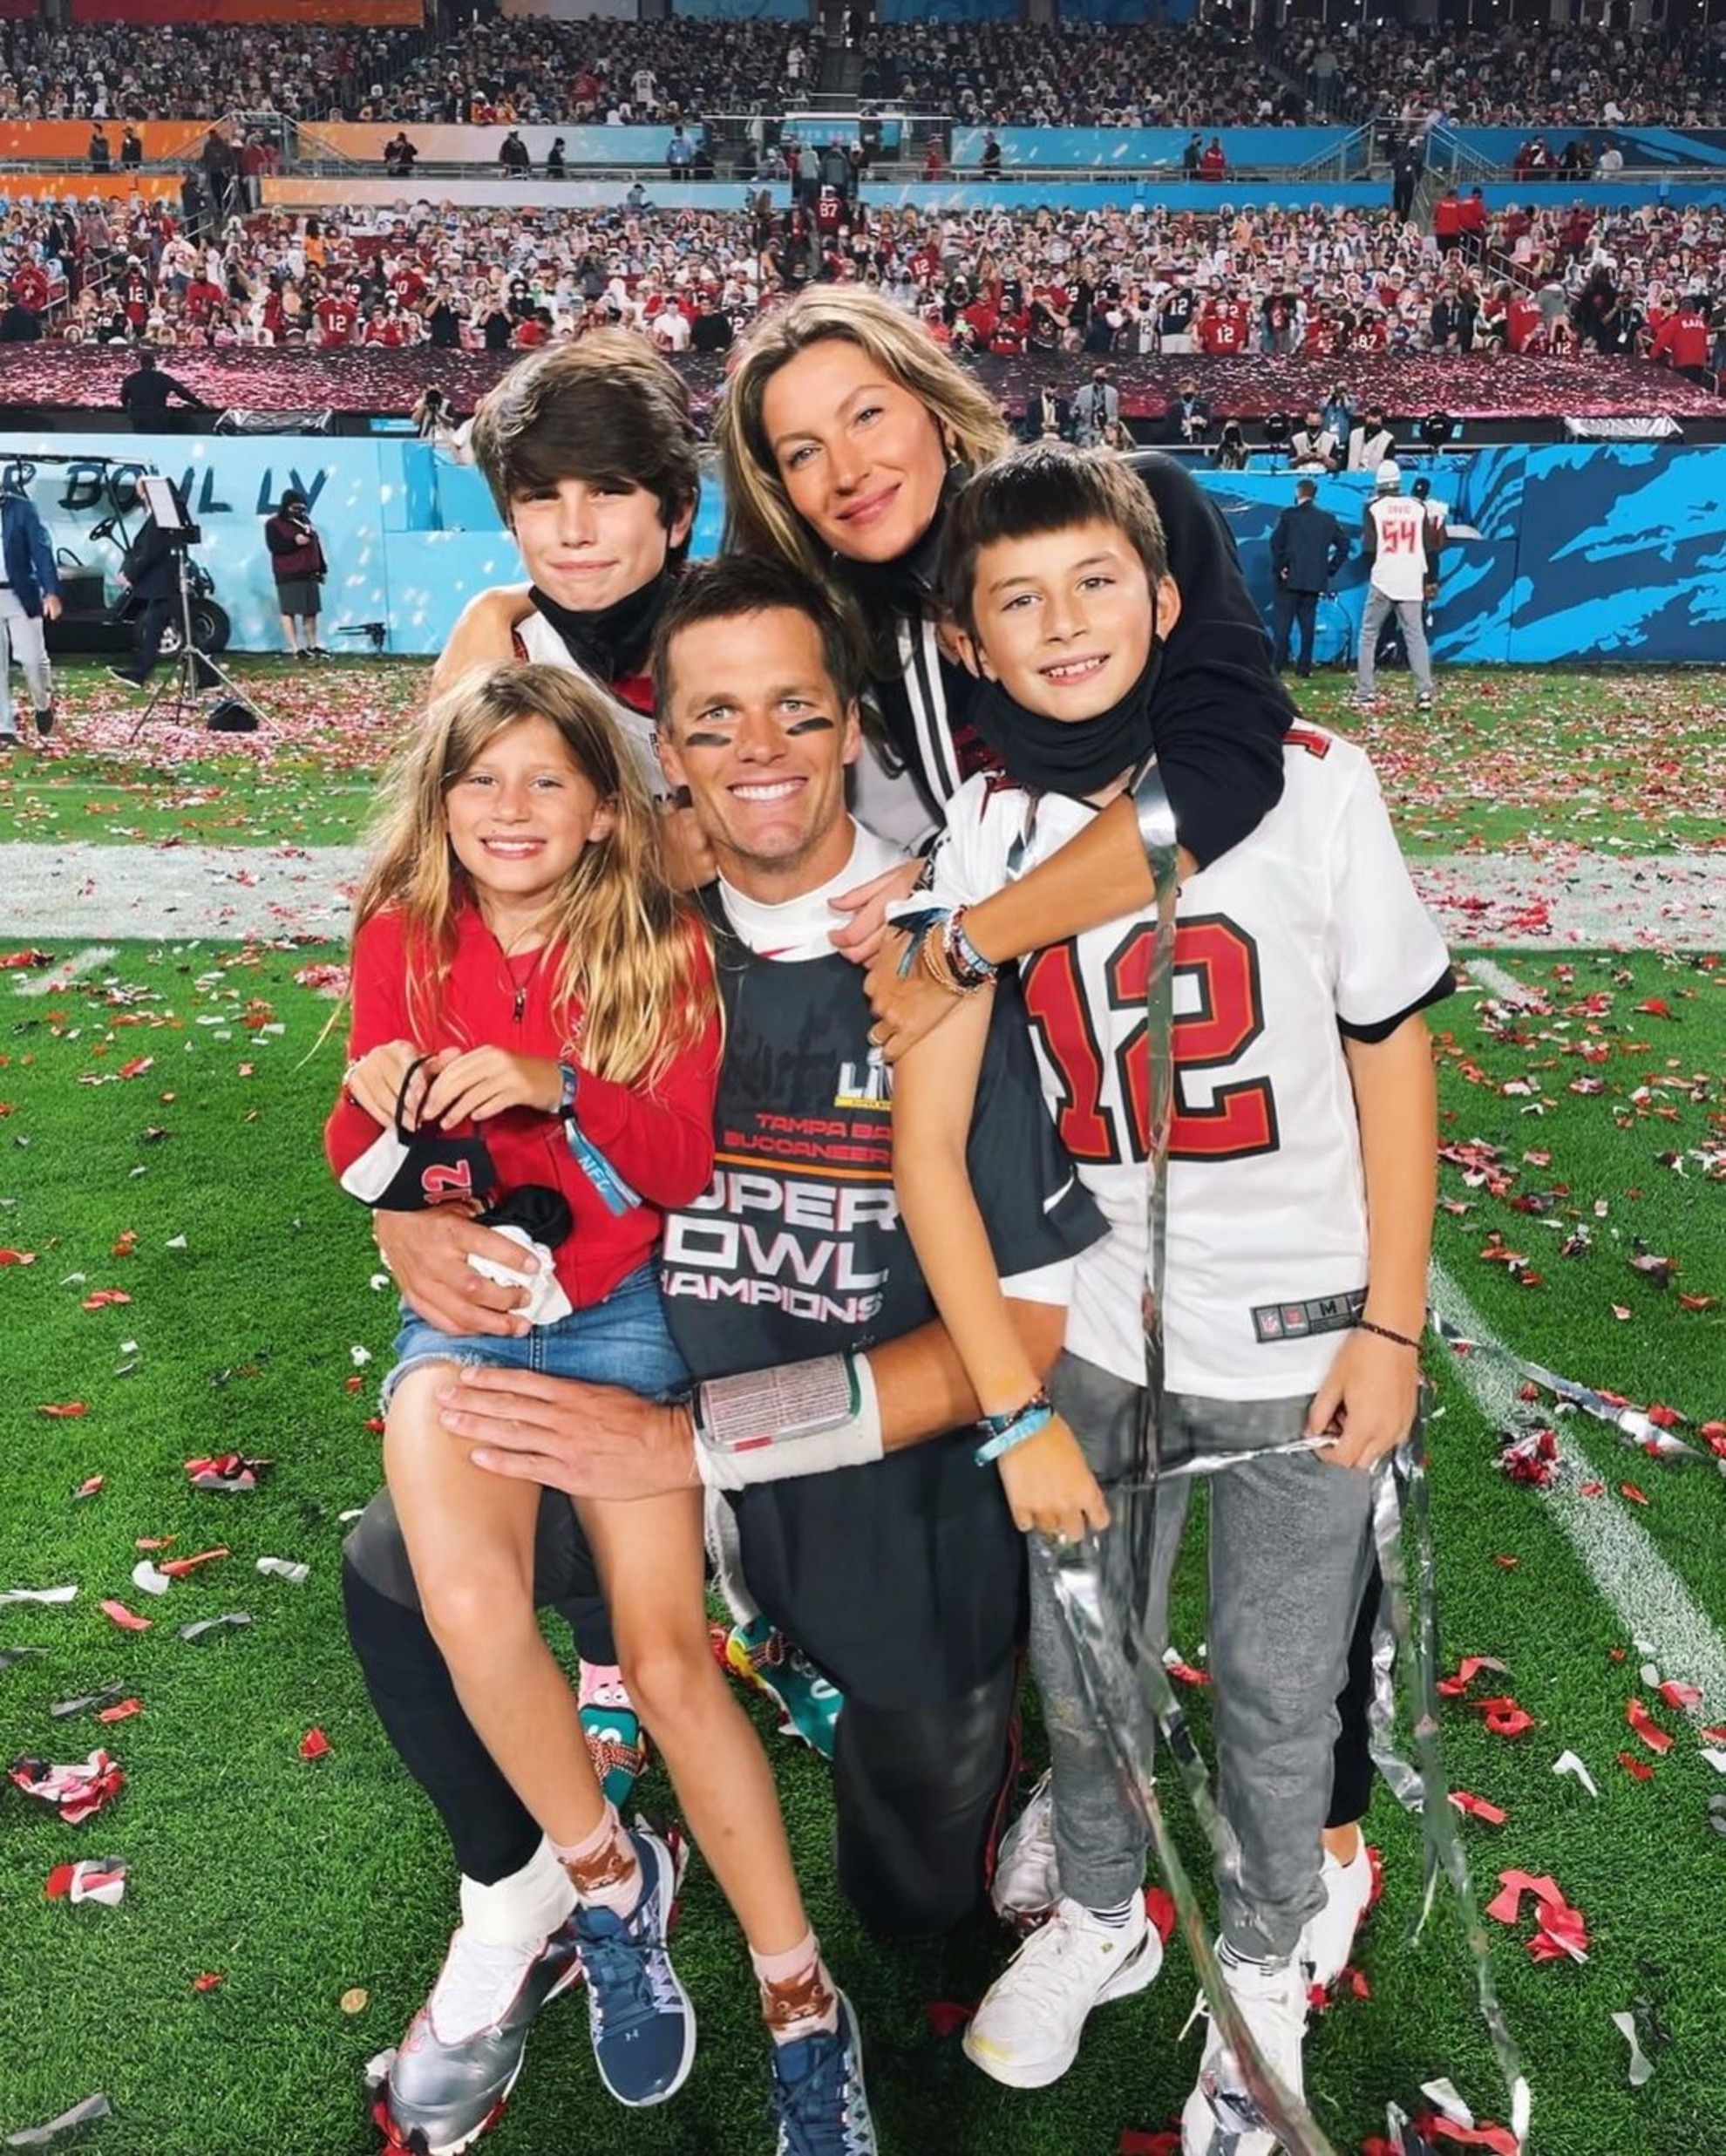 Joaquim Valente acts as a role model for the children of Gisele Bundchen and Tom Brady